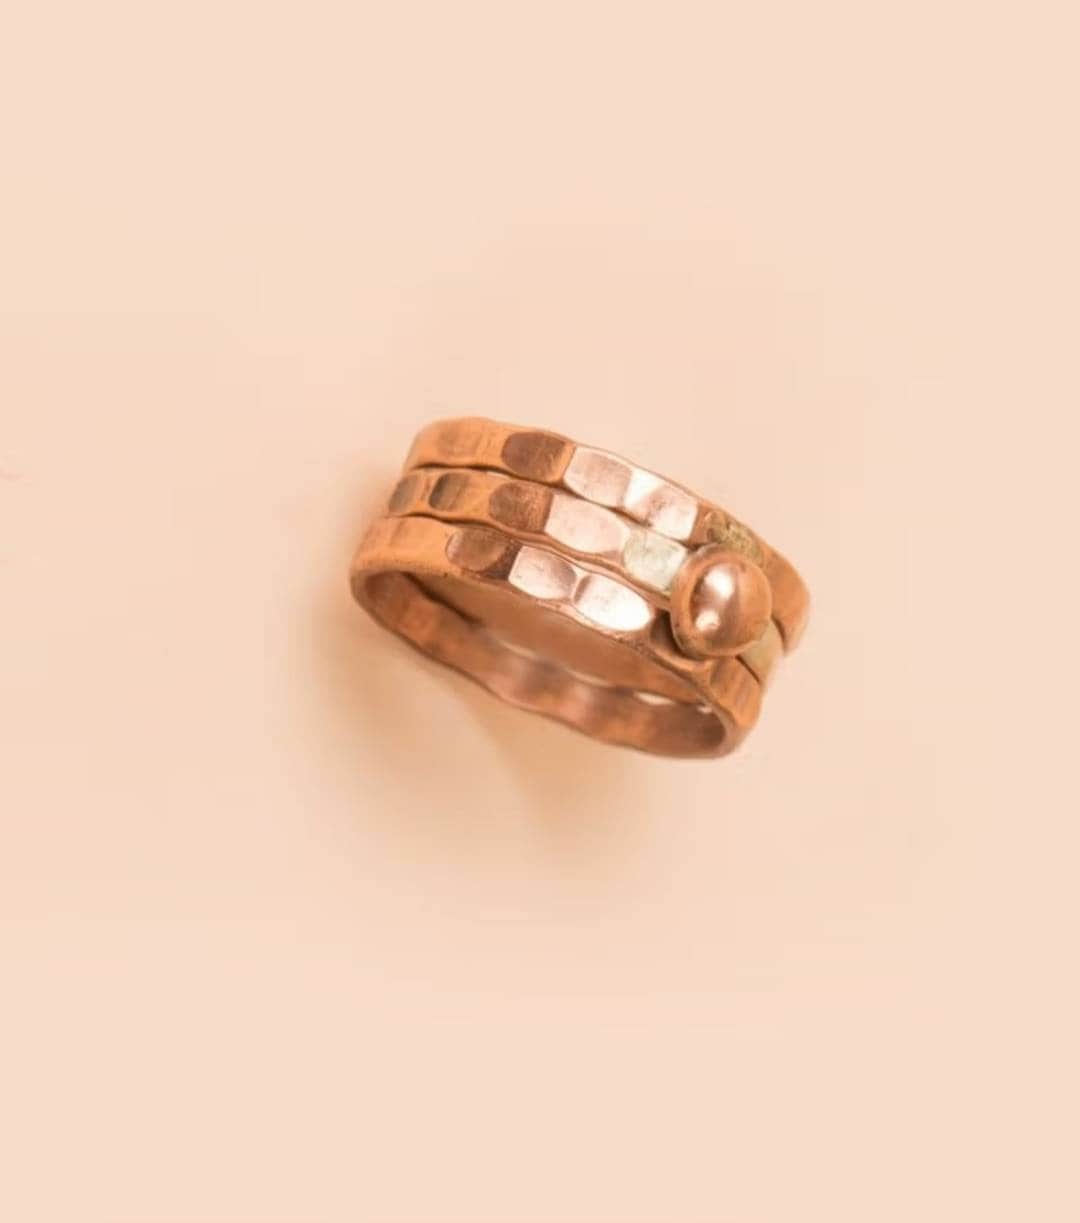 I've been wearing Isha foundation's snake ring for a few months now. I  noticed on days when I'm more compulsive or in a negative mood, the inside  of the snake ring would